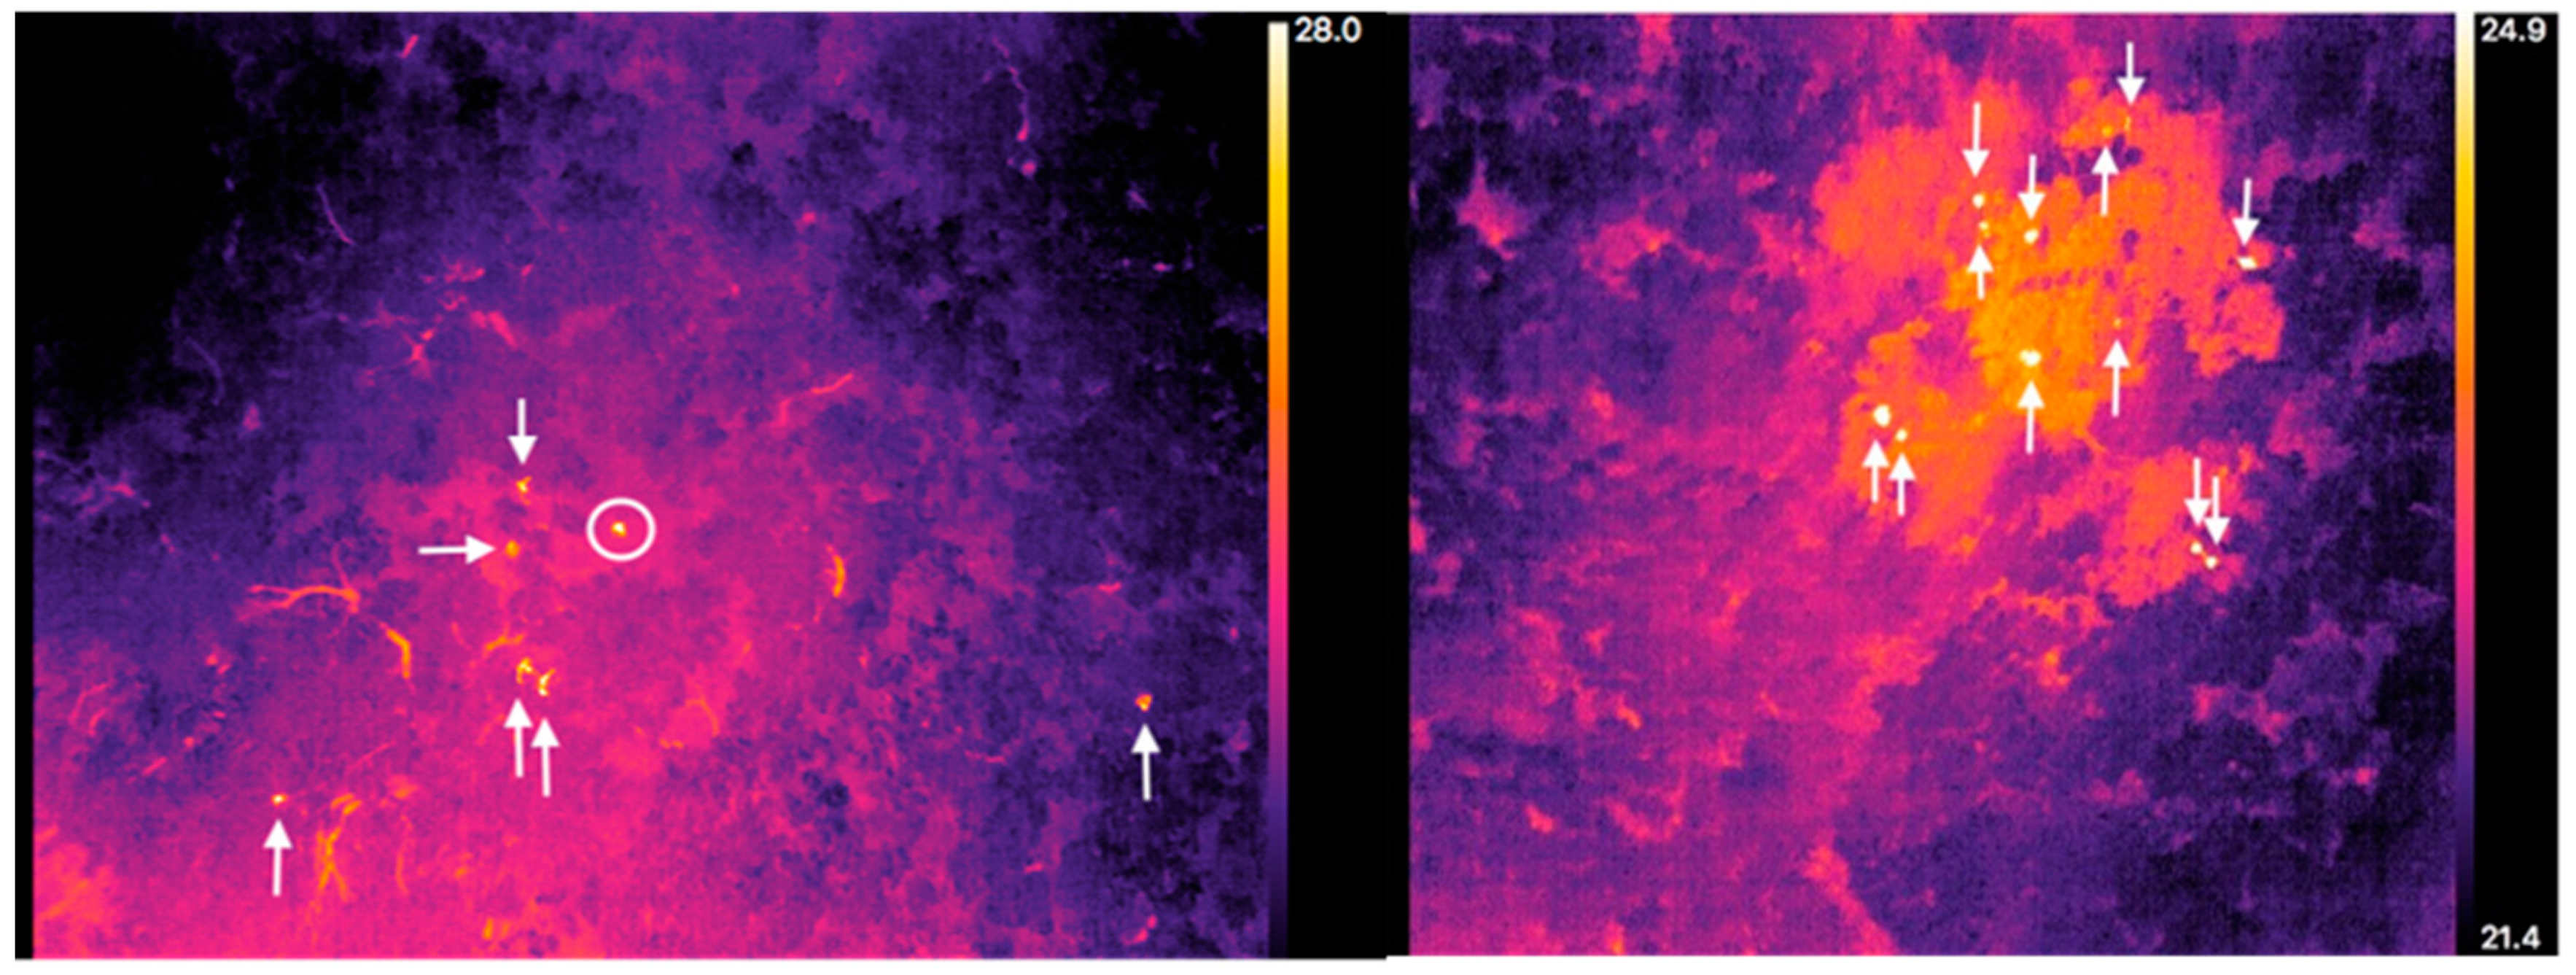 Drones | Free Full-Text | Thermal Infrared Imaging from Drones Offers a  Major Advance for Spider Monkey Surveys